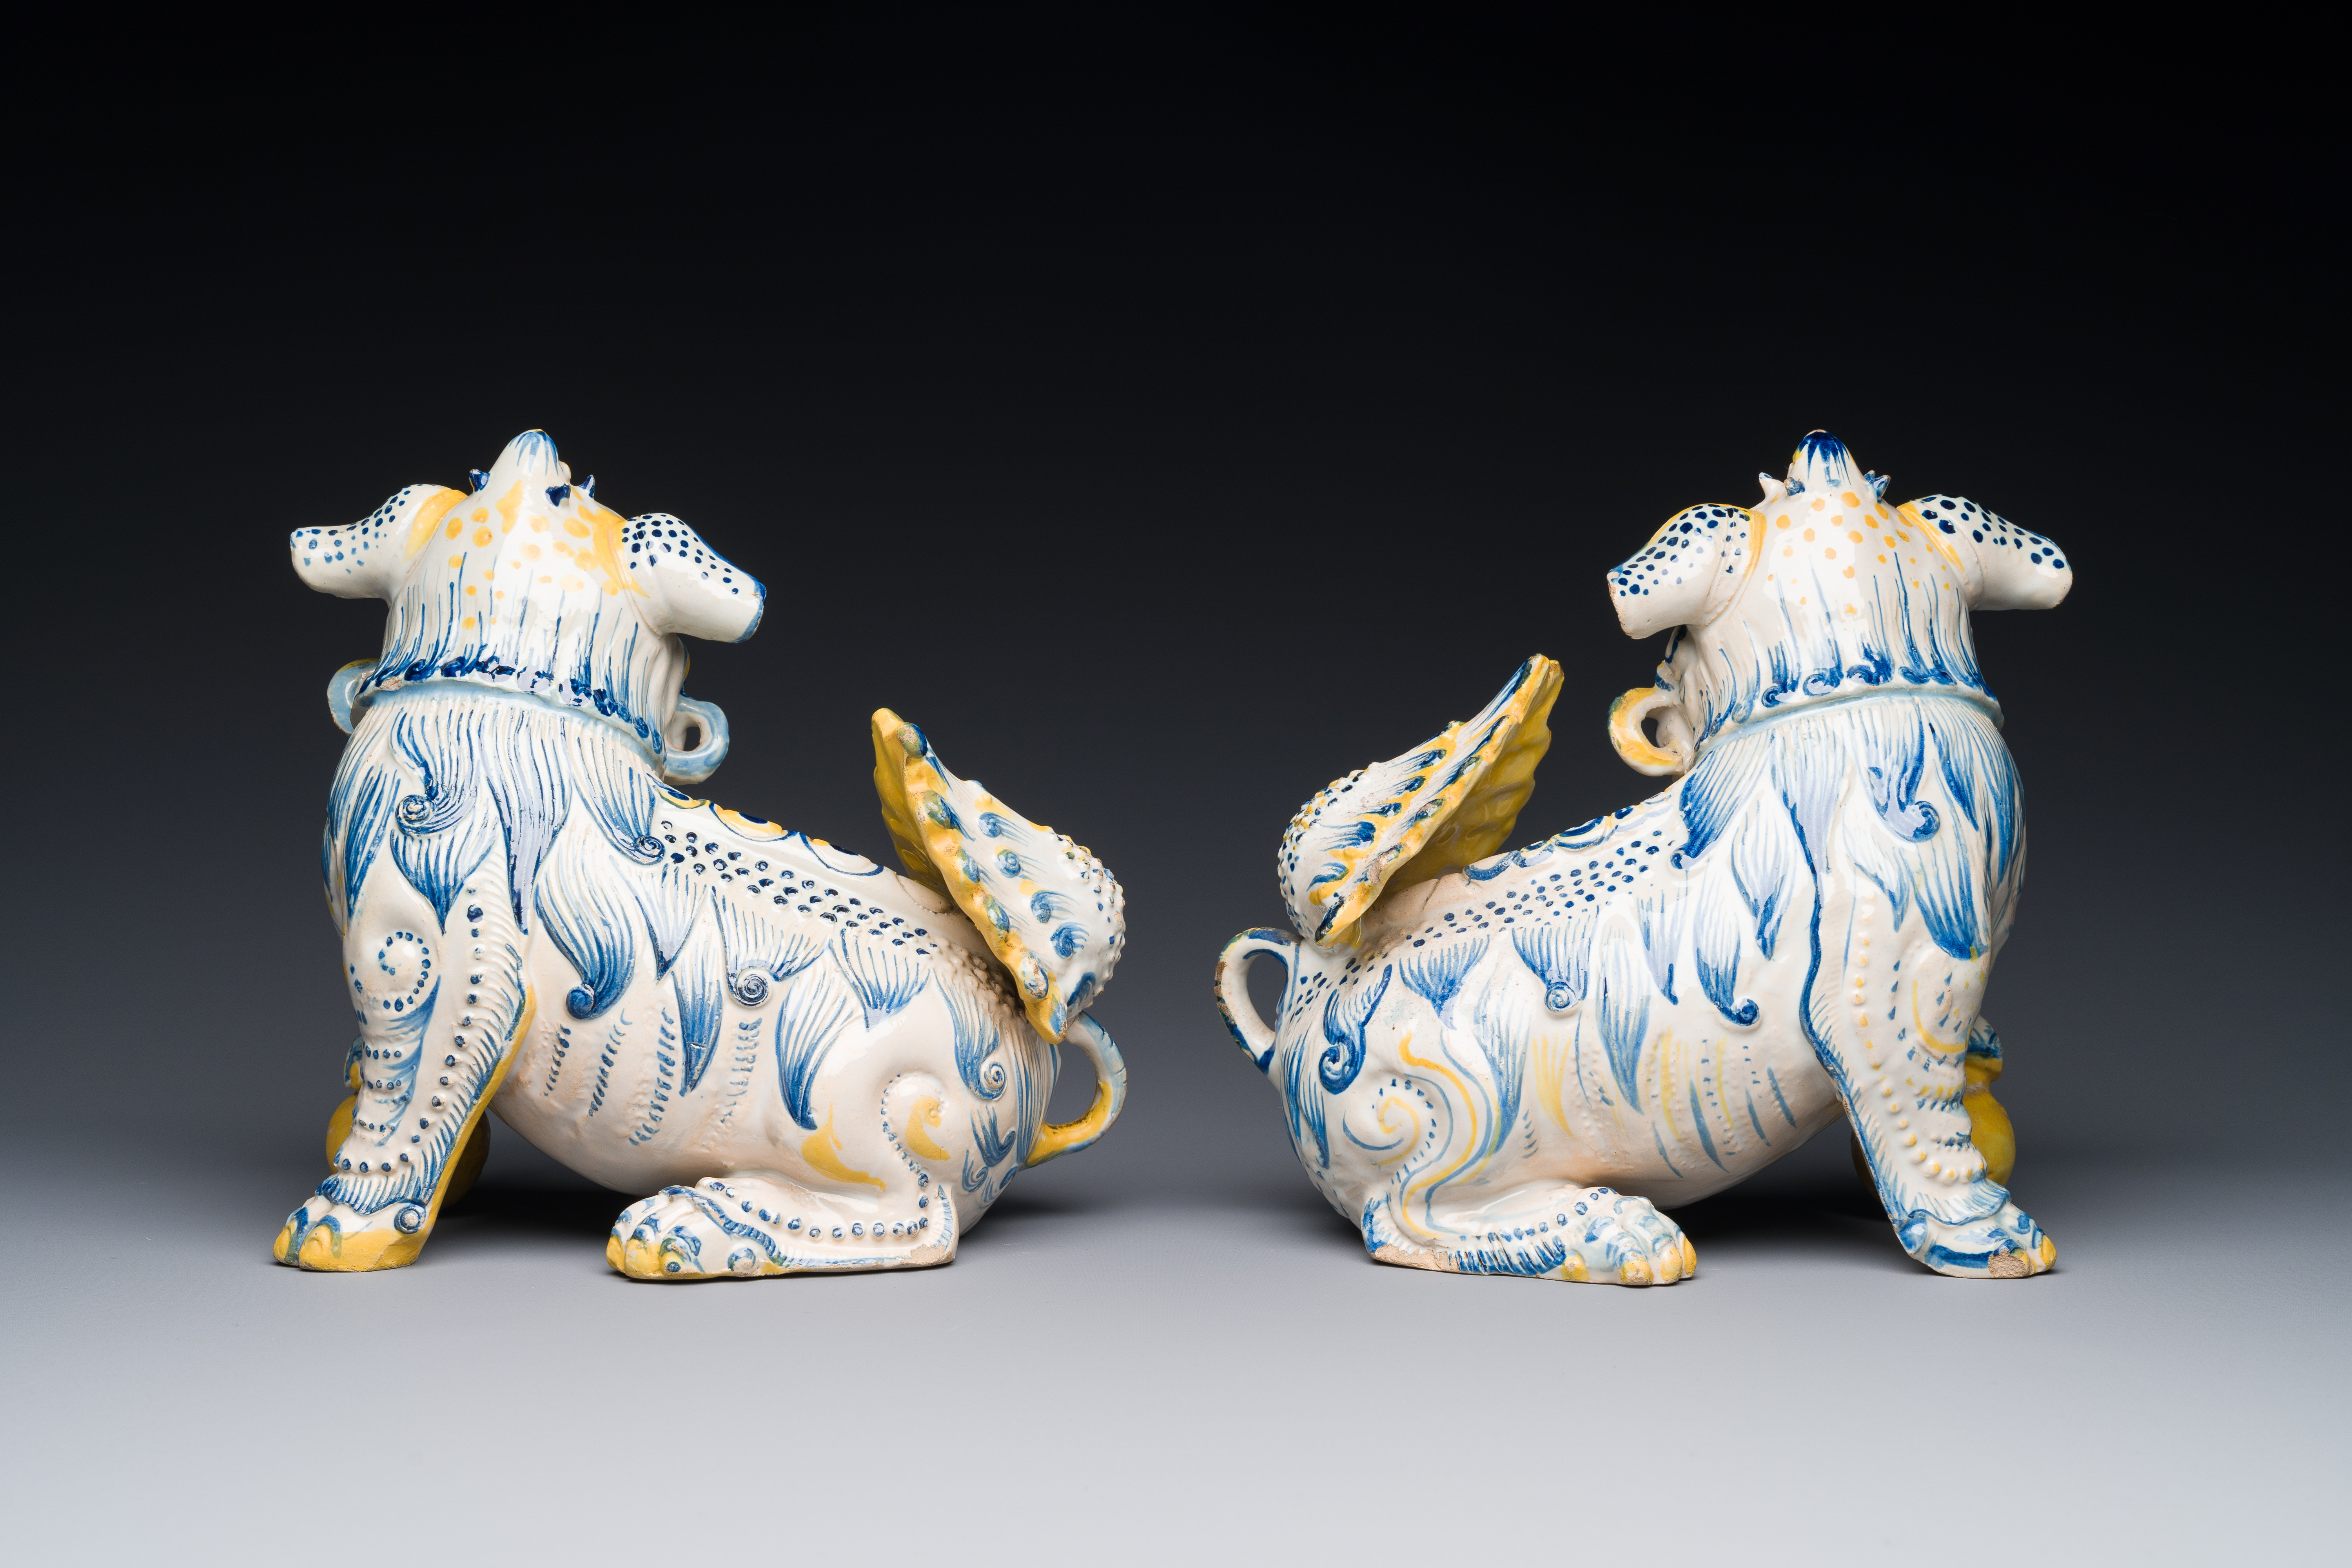 A pair of Portuguese polychrome faience sculptures of lions, 17/18th C. - Image 3 of 7